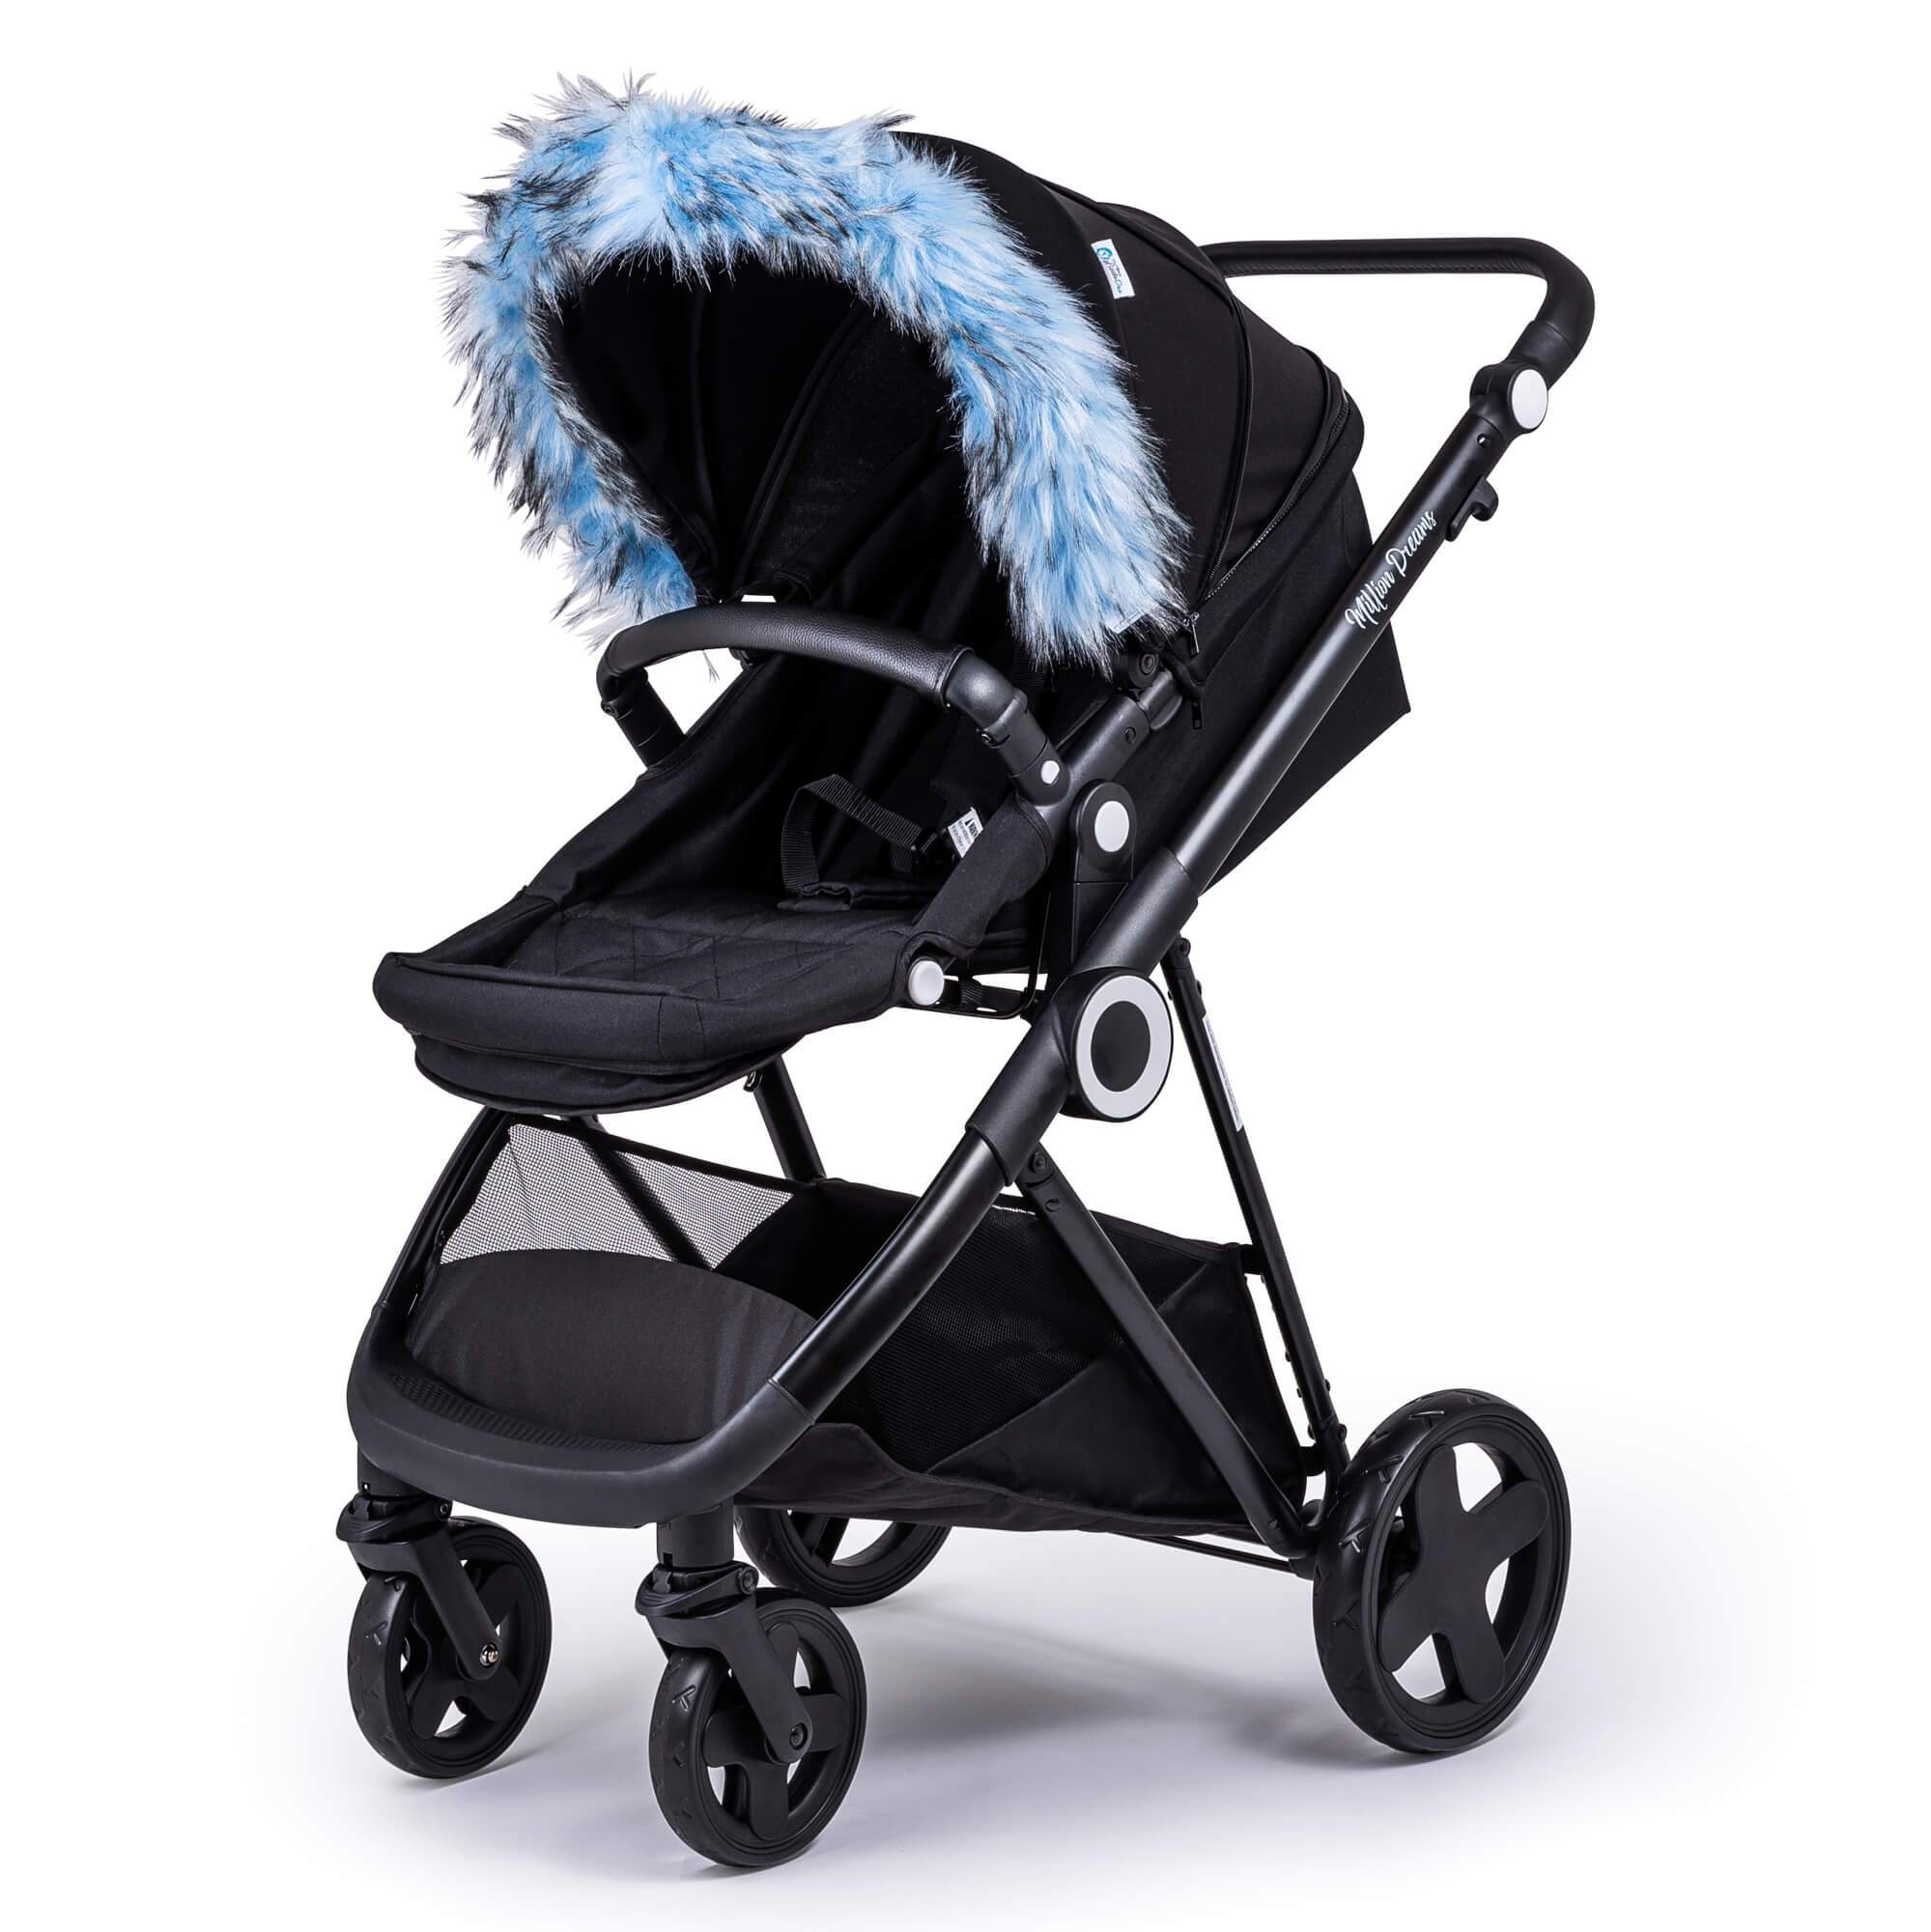 Pram Fur Hood Trim Attachment for Pushchair Compatible with Mothercare - Light Blue / Fits All Models | For Your Little One